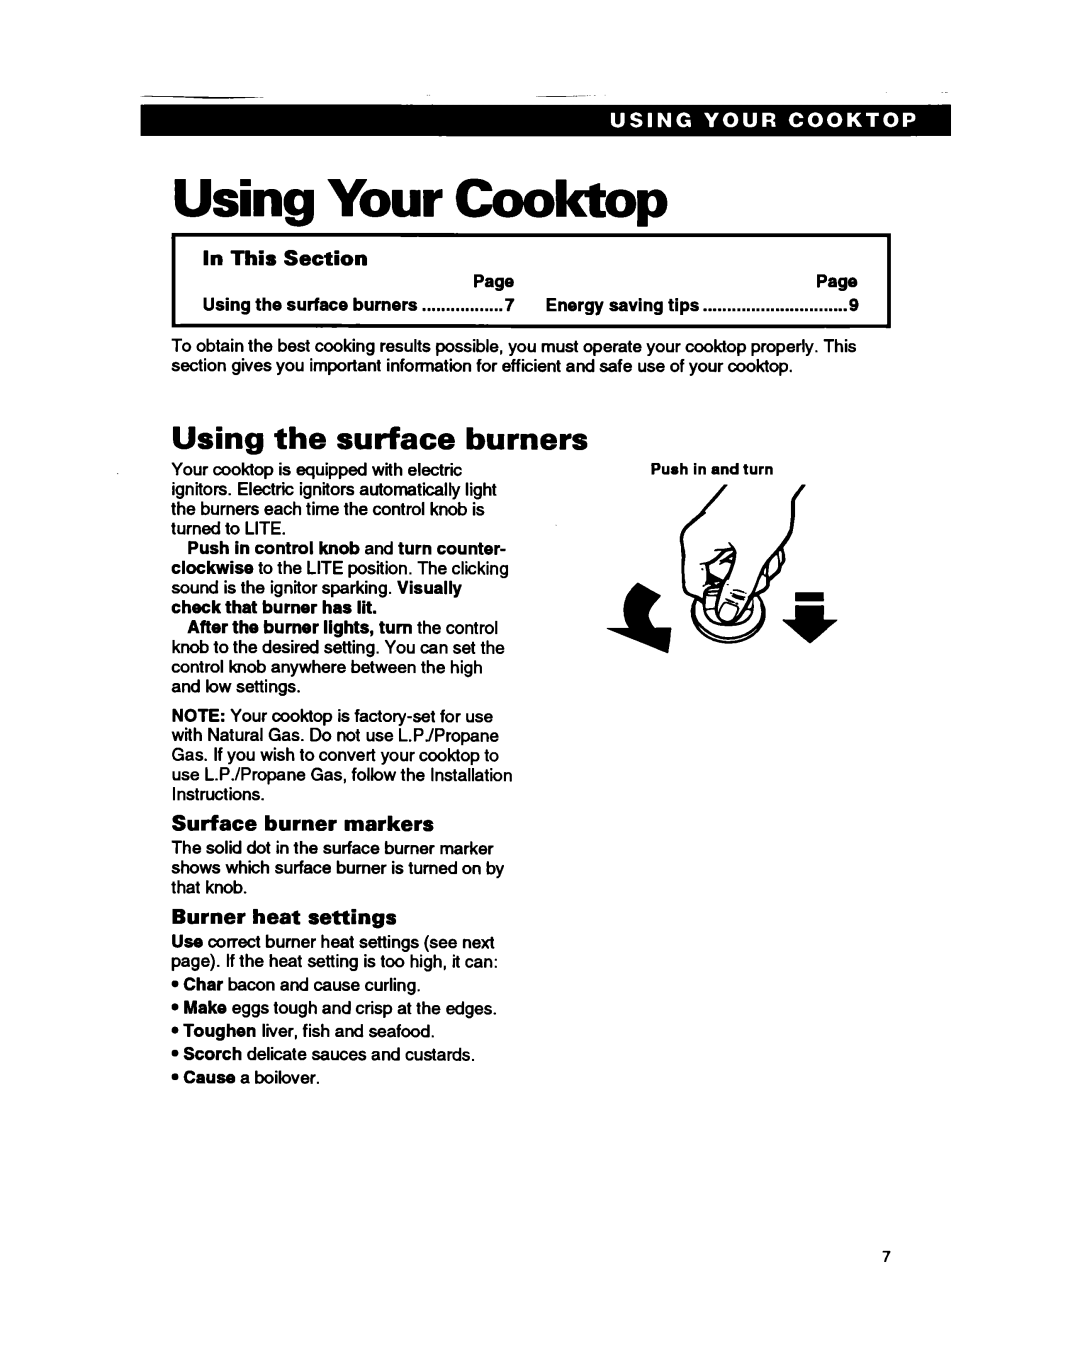 Whirlpool SC8636EB warranty Using Your Cooktop, Using the surface, burners, In This Section, Surface burner markers 